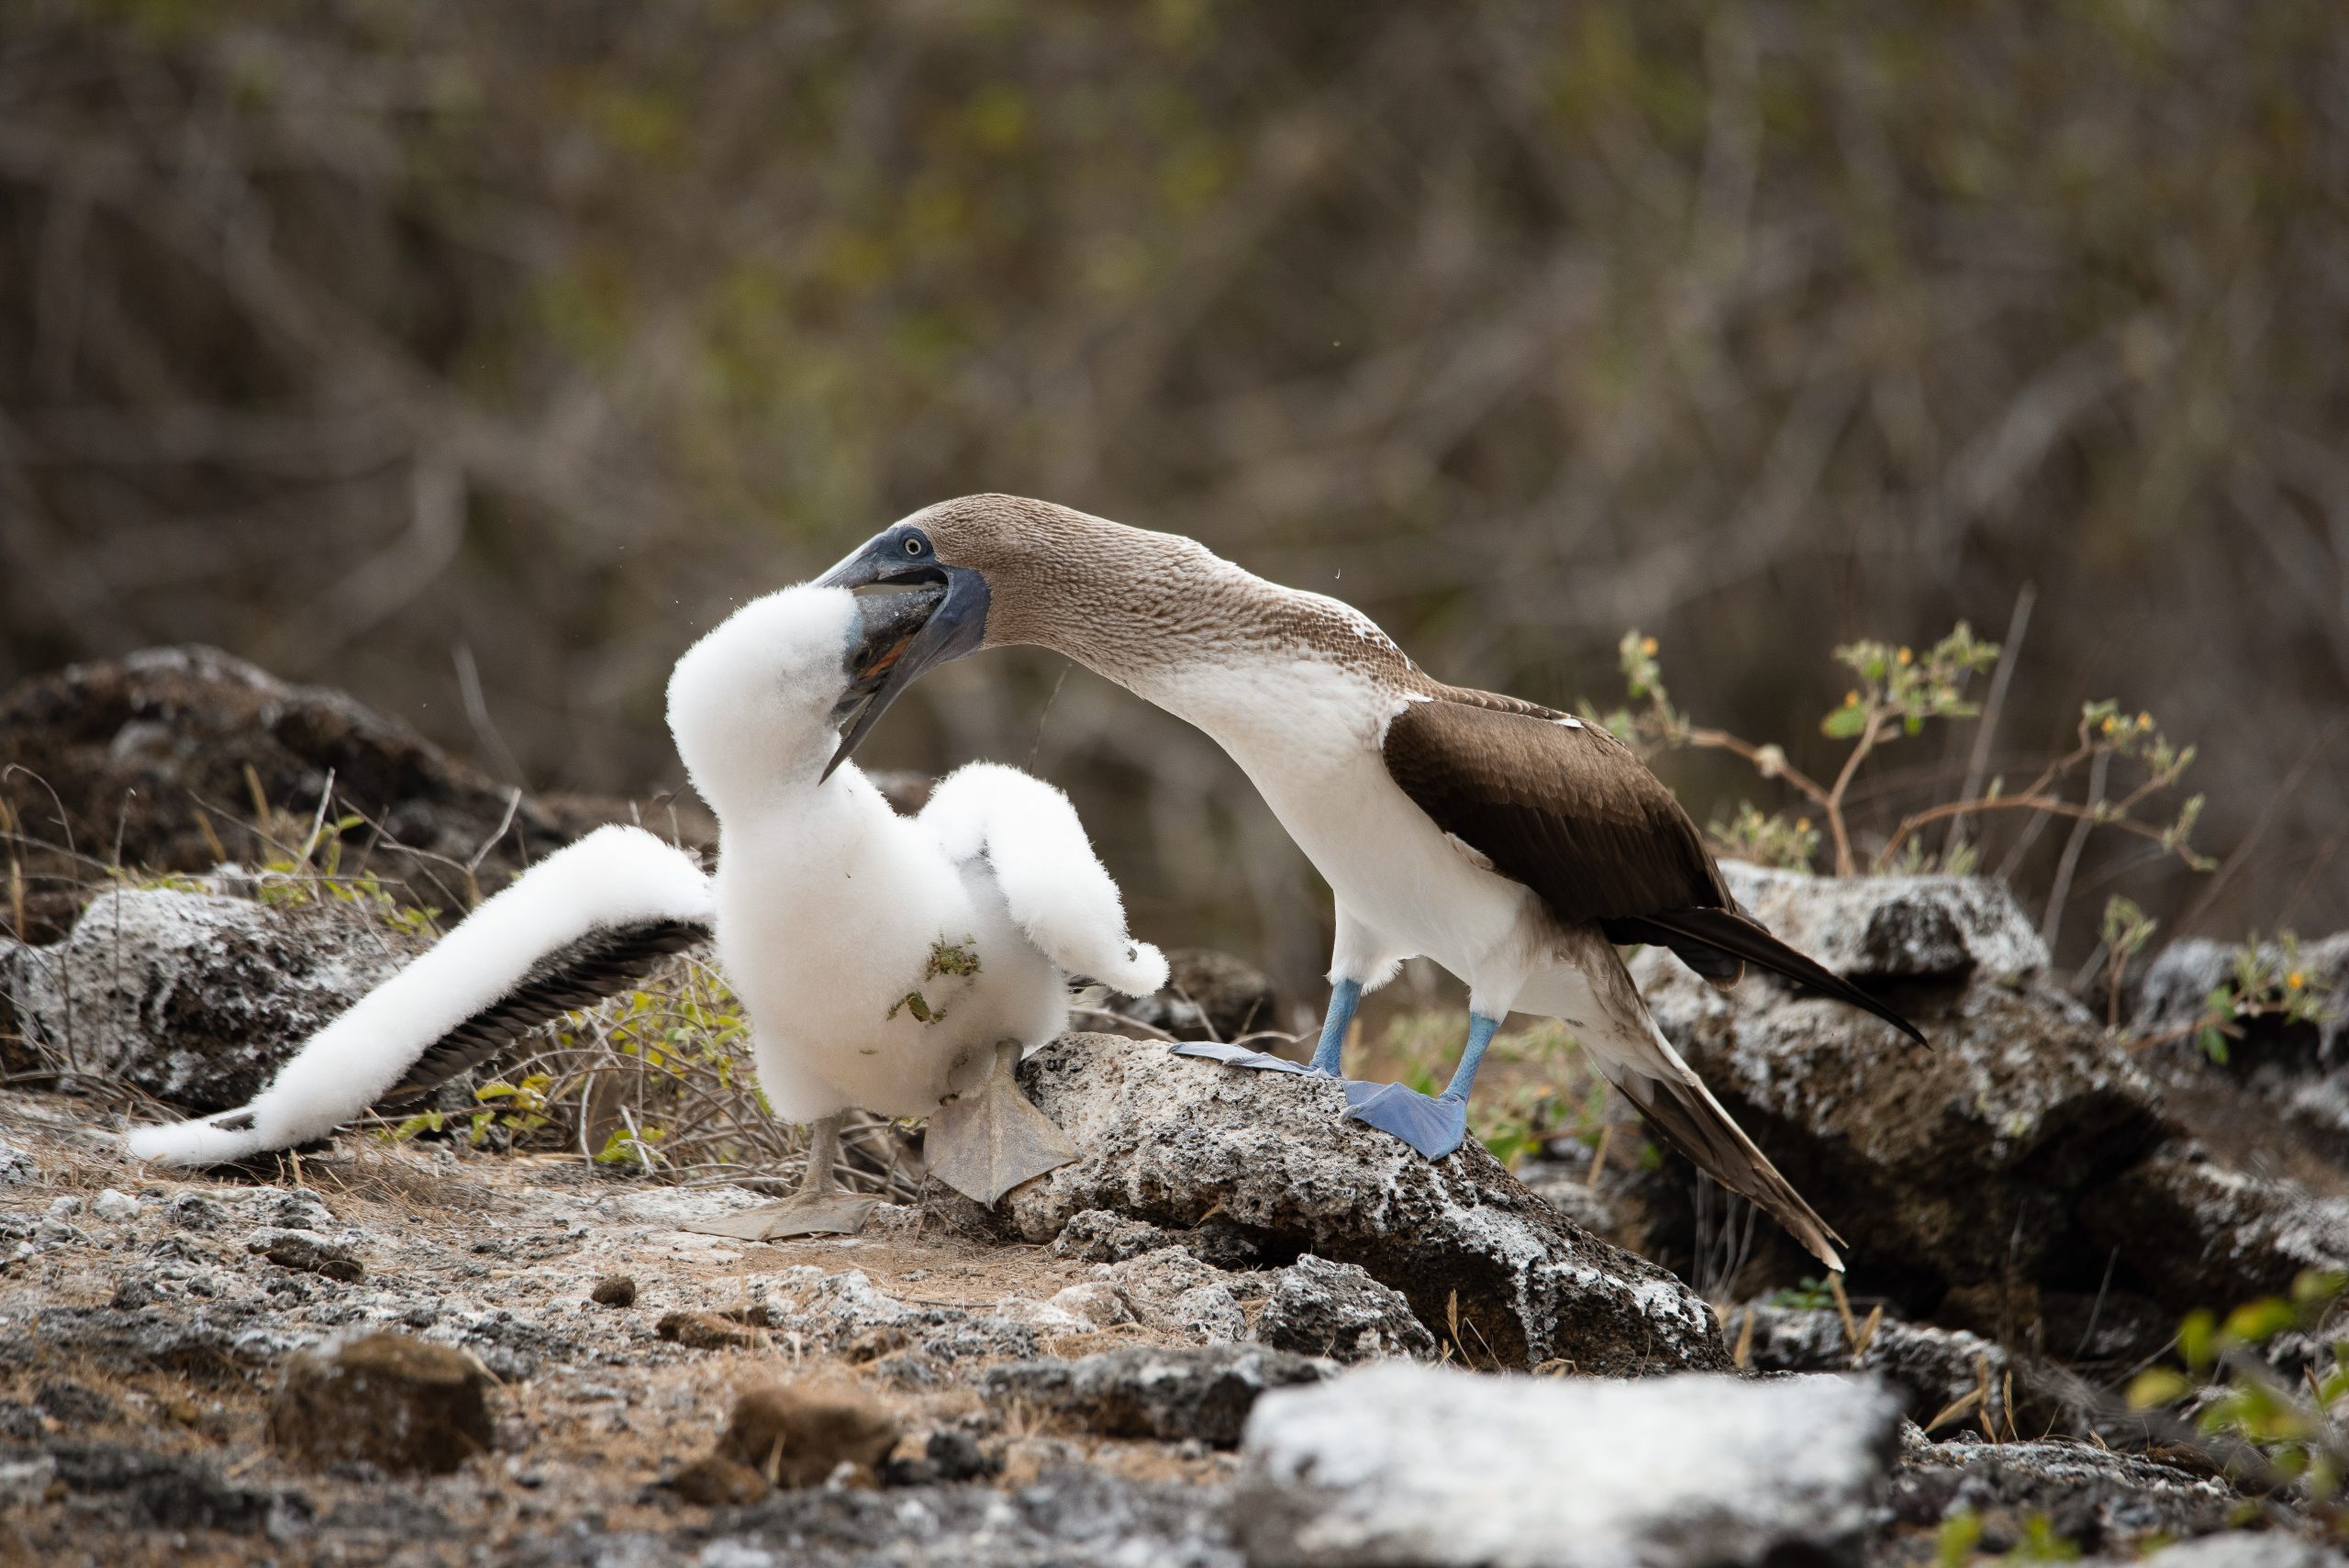 Migratory Patterns Of Galapagos Animals - What to Expect